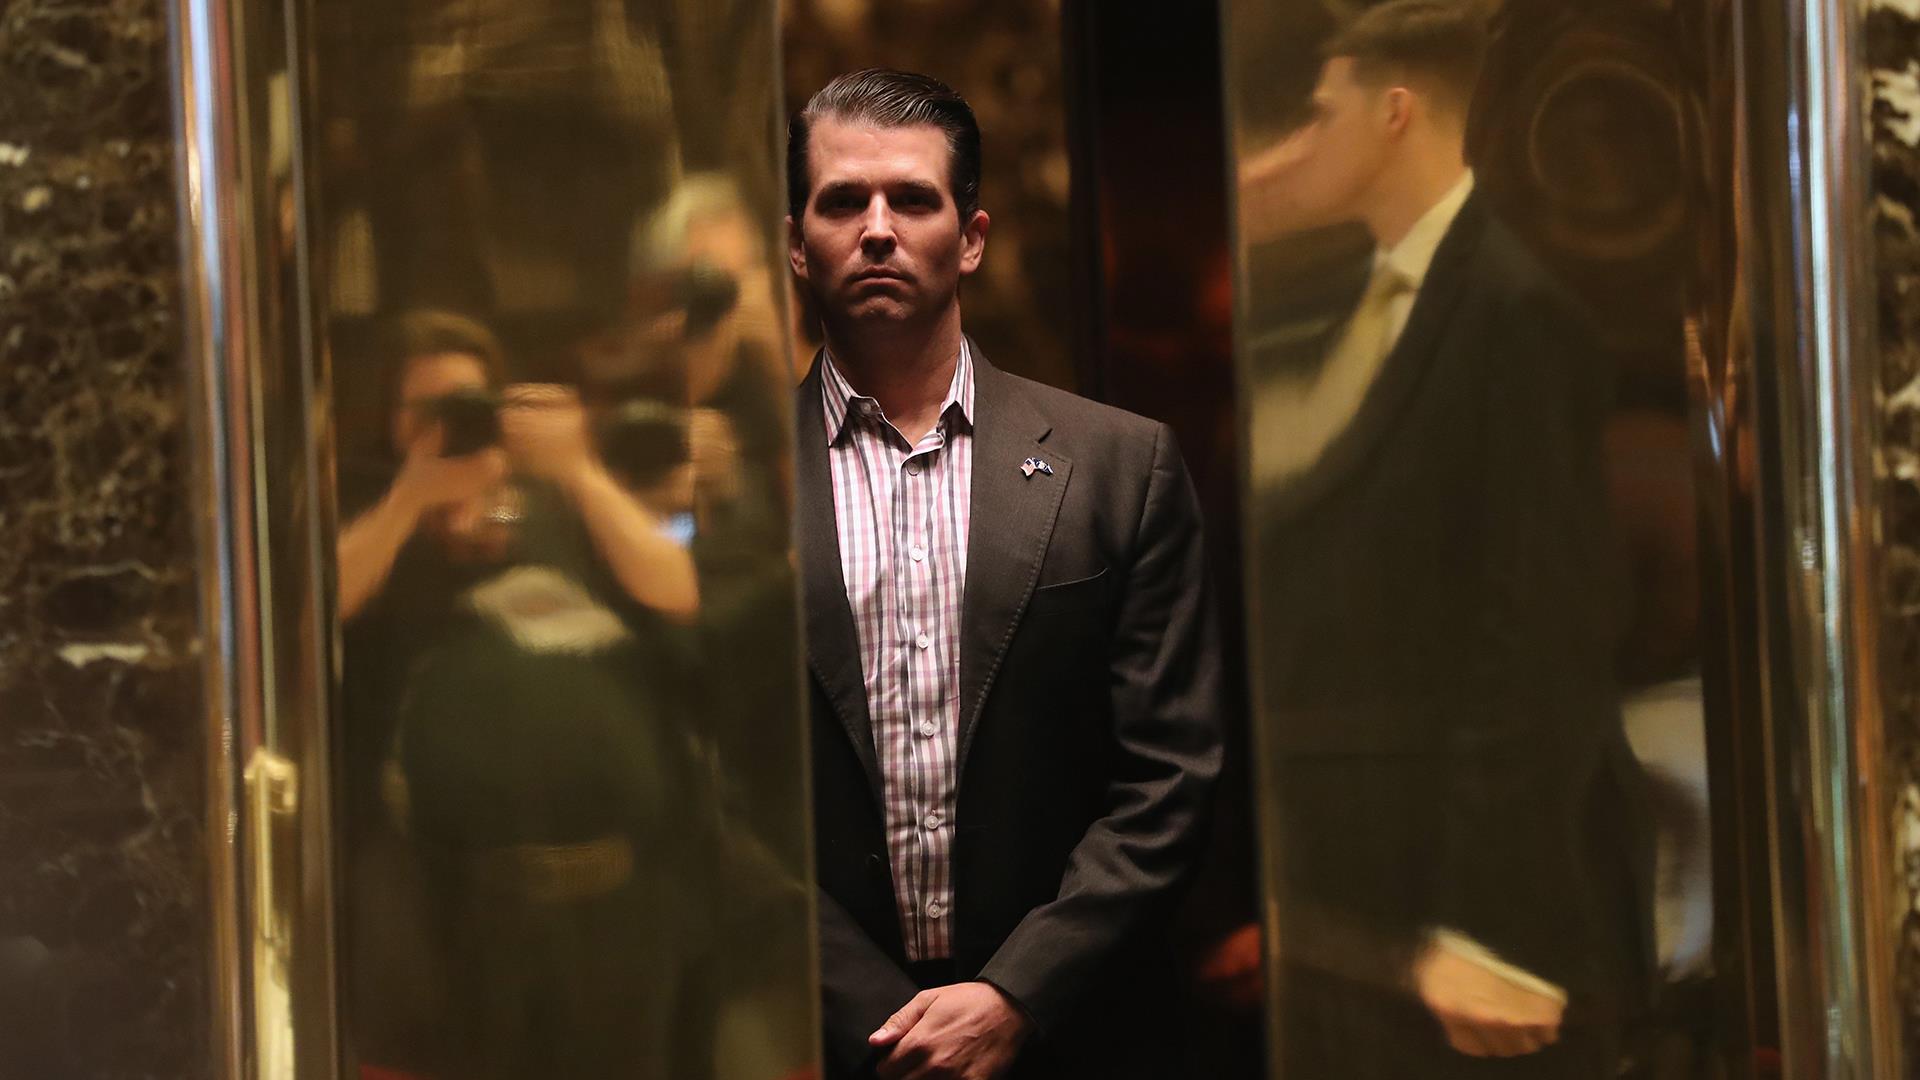 Donald Trump Jr. asked Russian lawyer for info on Clinton Foundation